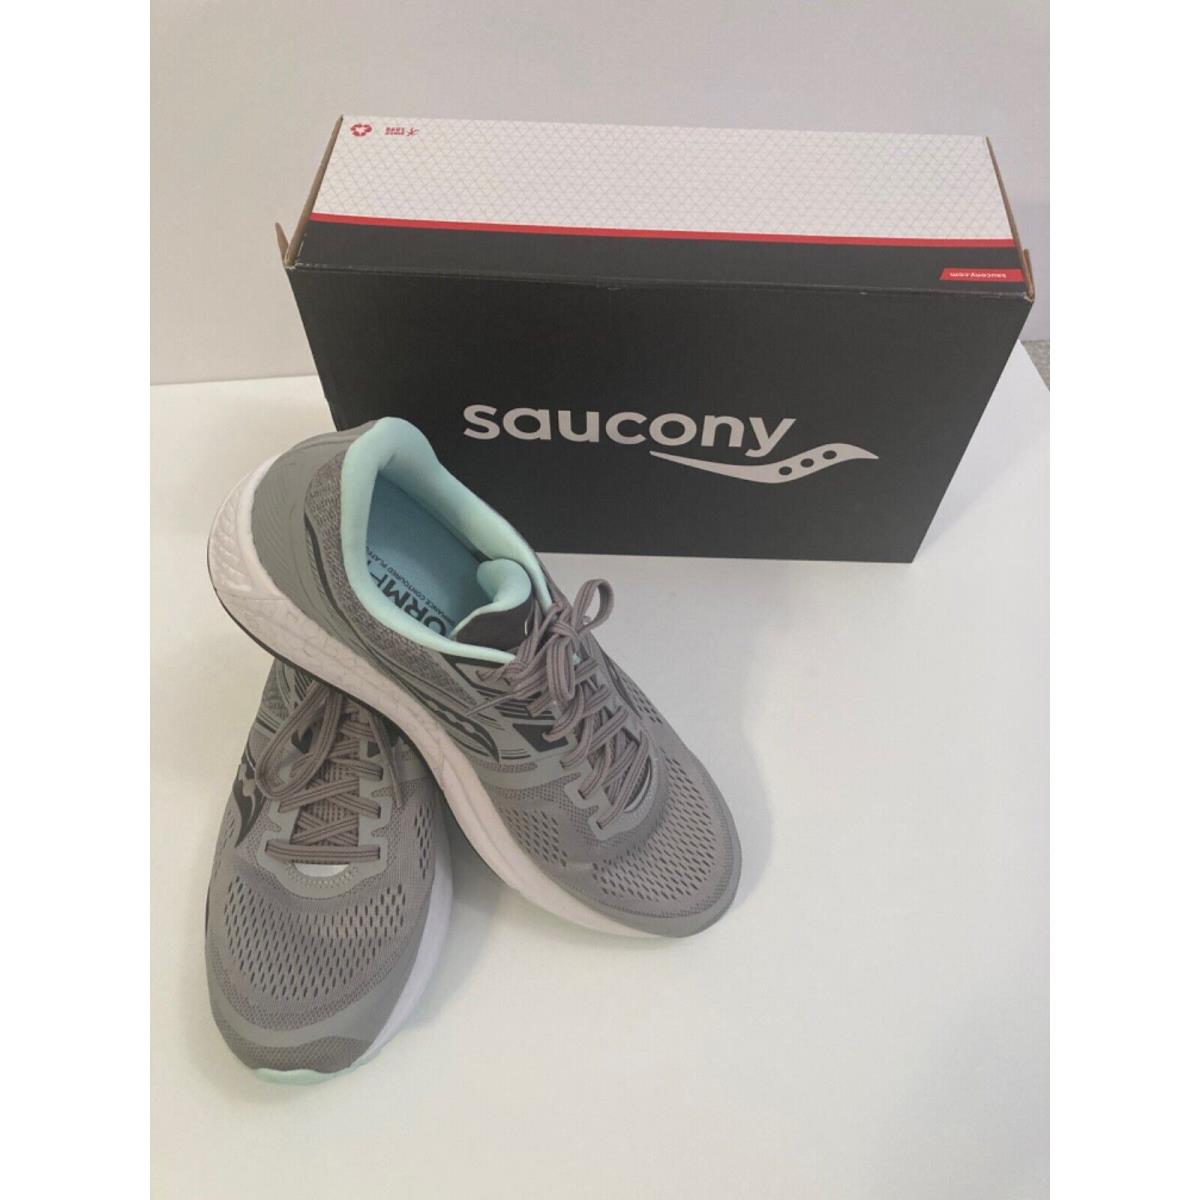 Saucony shoes Omni - grey and mint green 2